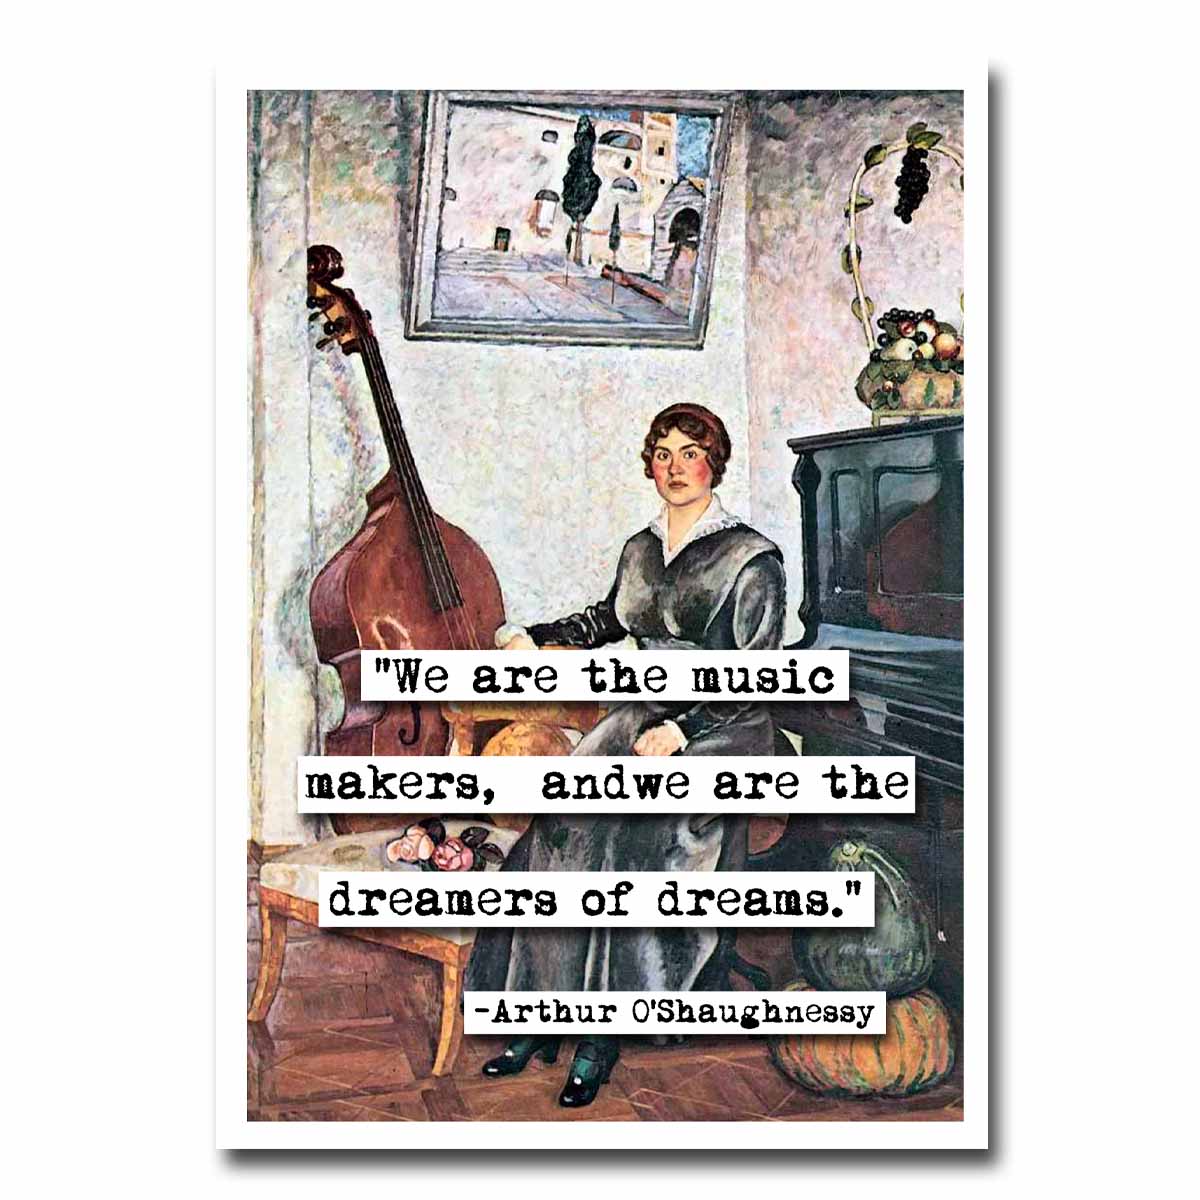 Arthur O'Shaughnessy Dreamers of Dreams Quote Blank Greeting Card